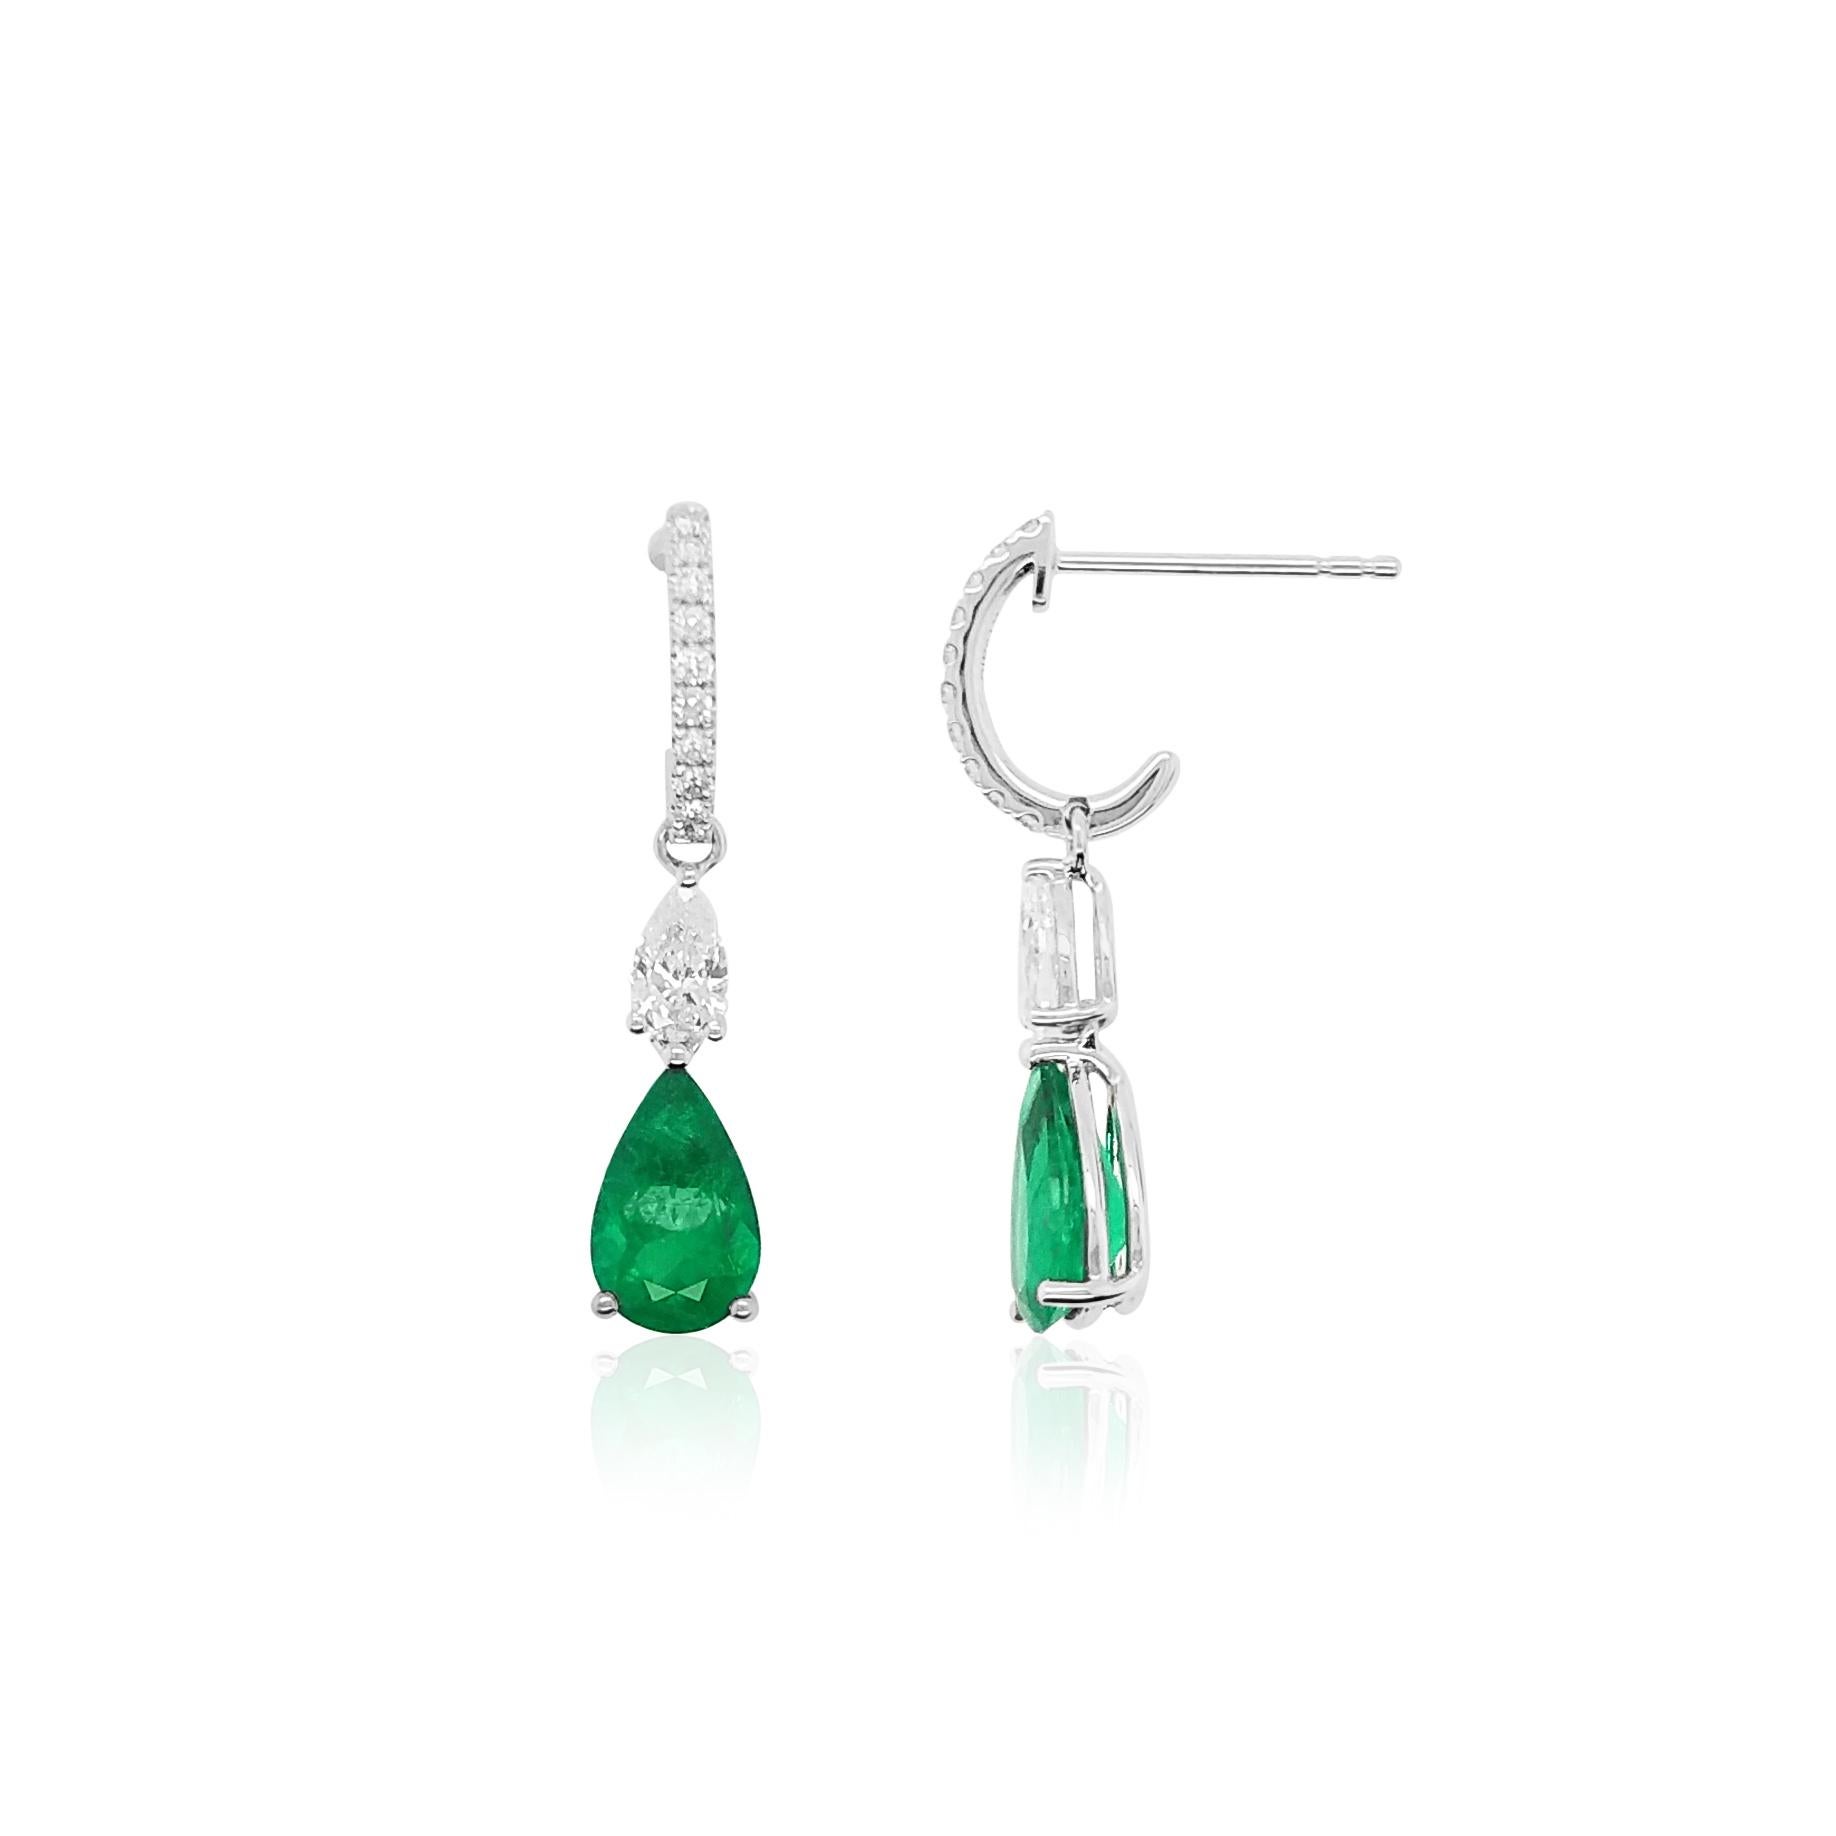 These elegant 18K gold earrings feature vibrant, natural colour Pear-shape Colombian Emerald beneath delicate diamonds stream. Set in 18 Karat white gold to perfectly enrich the colour of the emeralds and the sparkle of the diamonds, these intricate